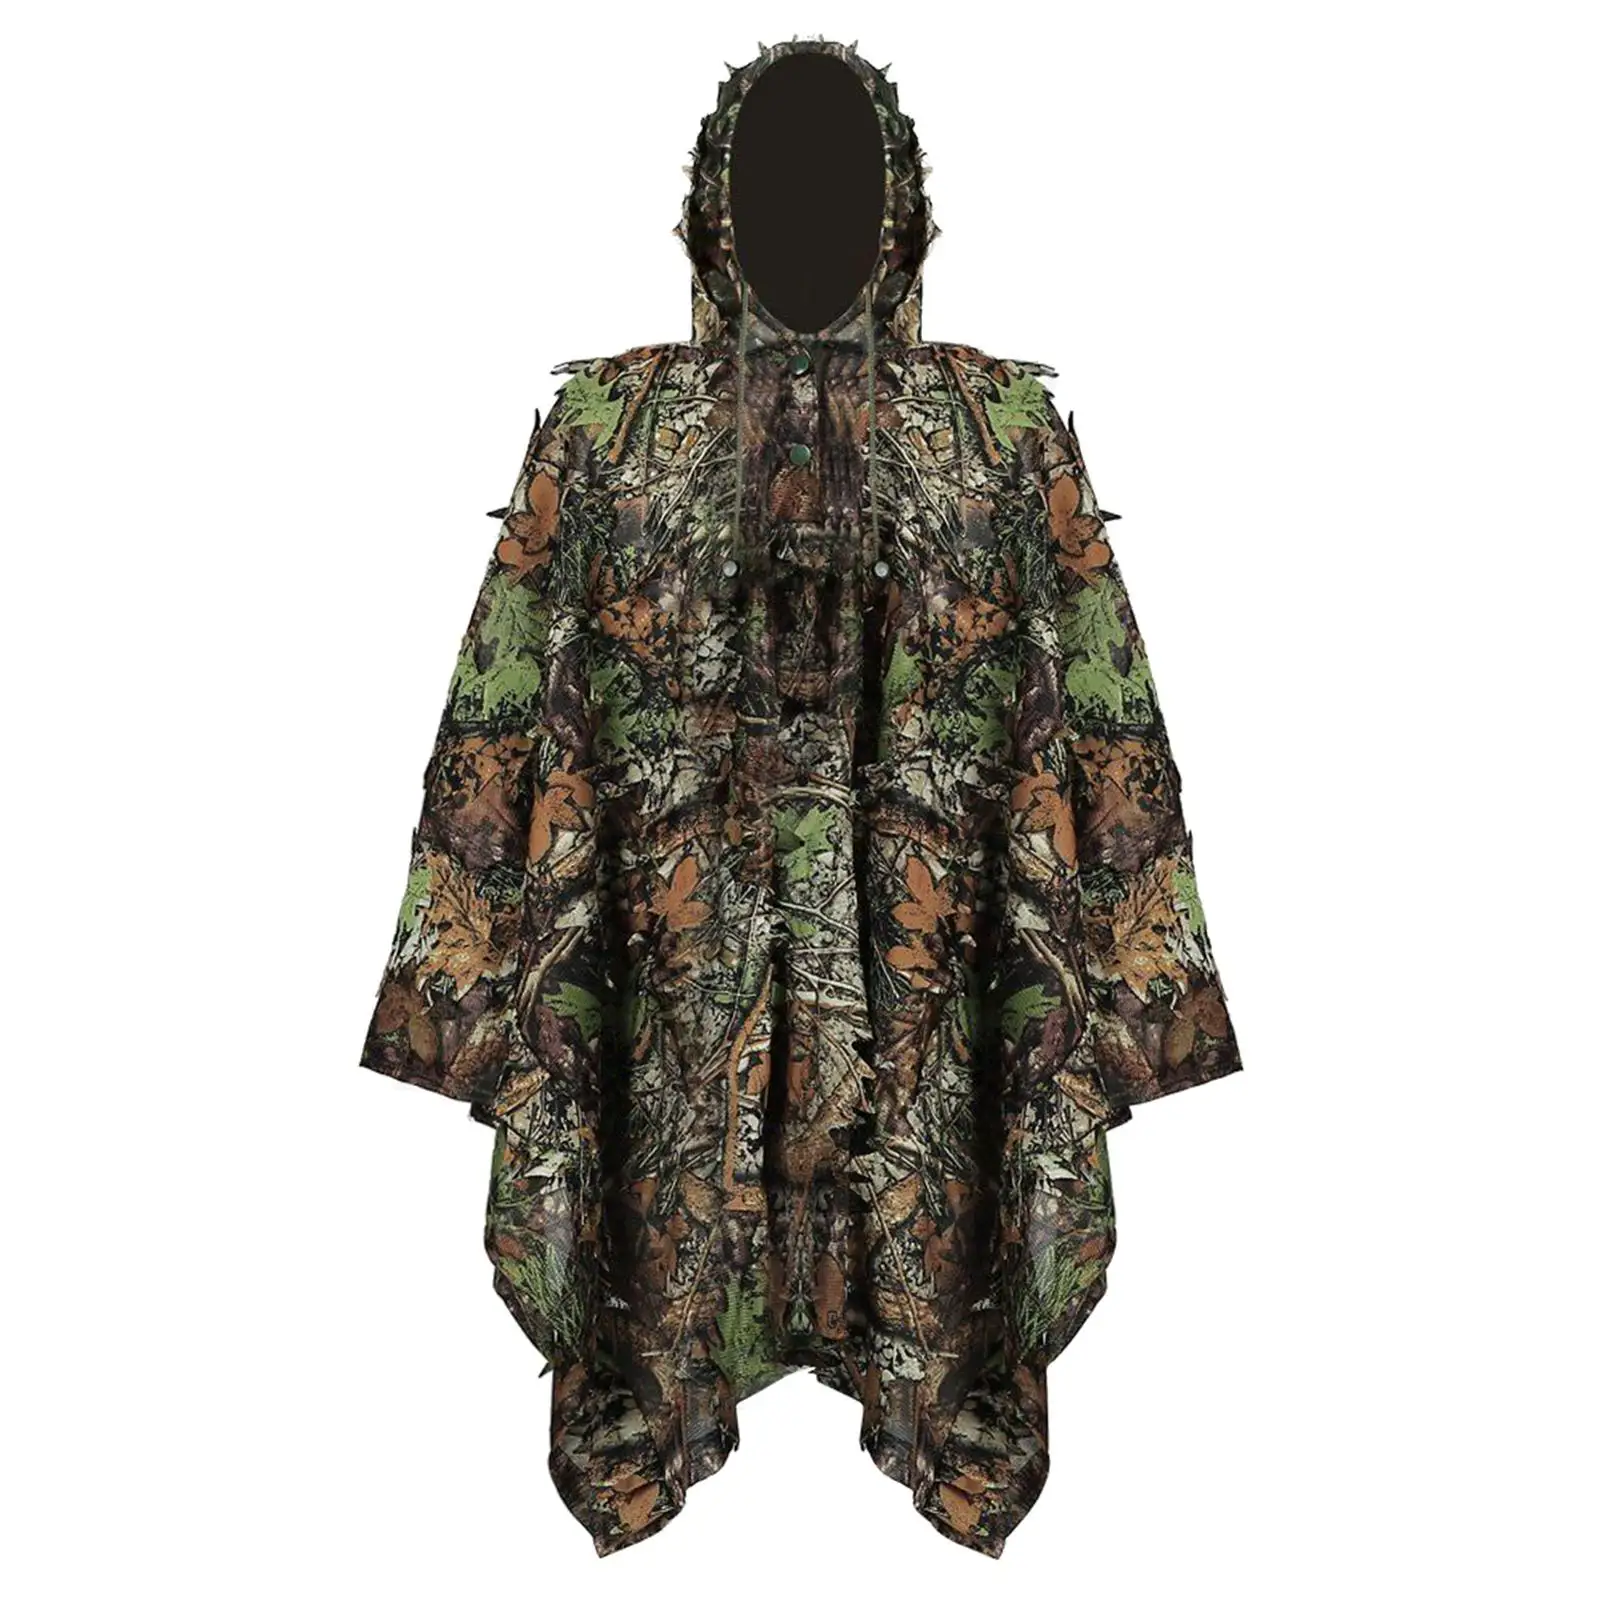 Ghillie Suit for Men Breathable Woodland Clothes Jacket Hood Cosplay suits for Photography Hunting Party Halloween Bird Watching